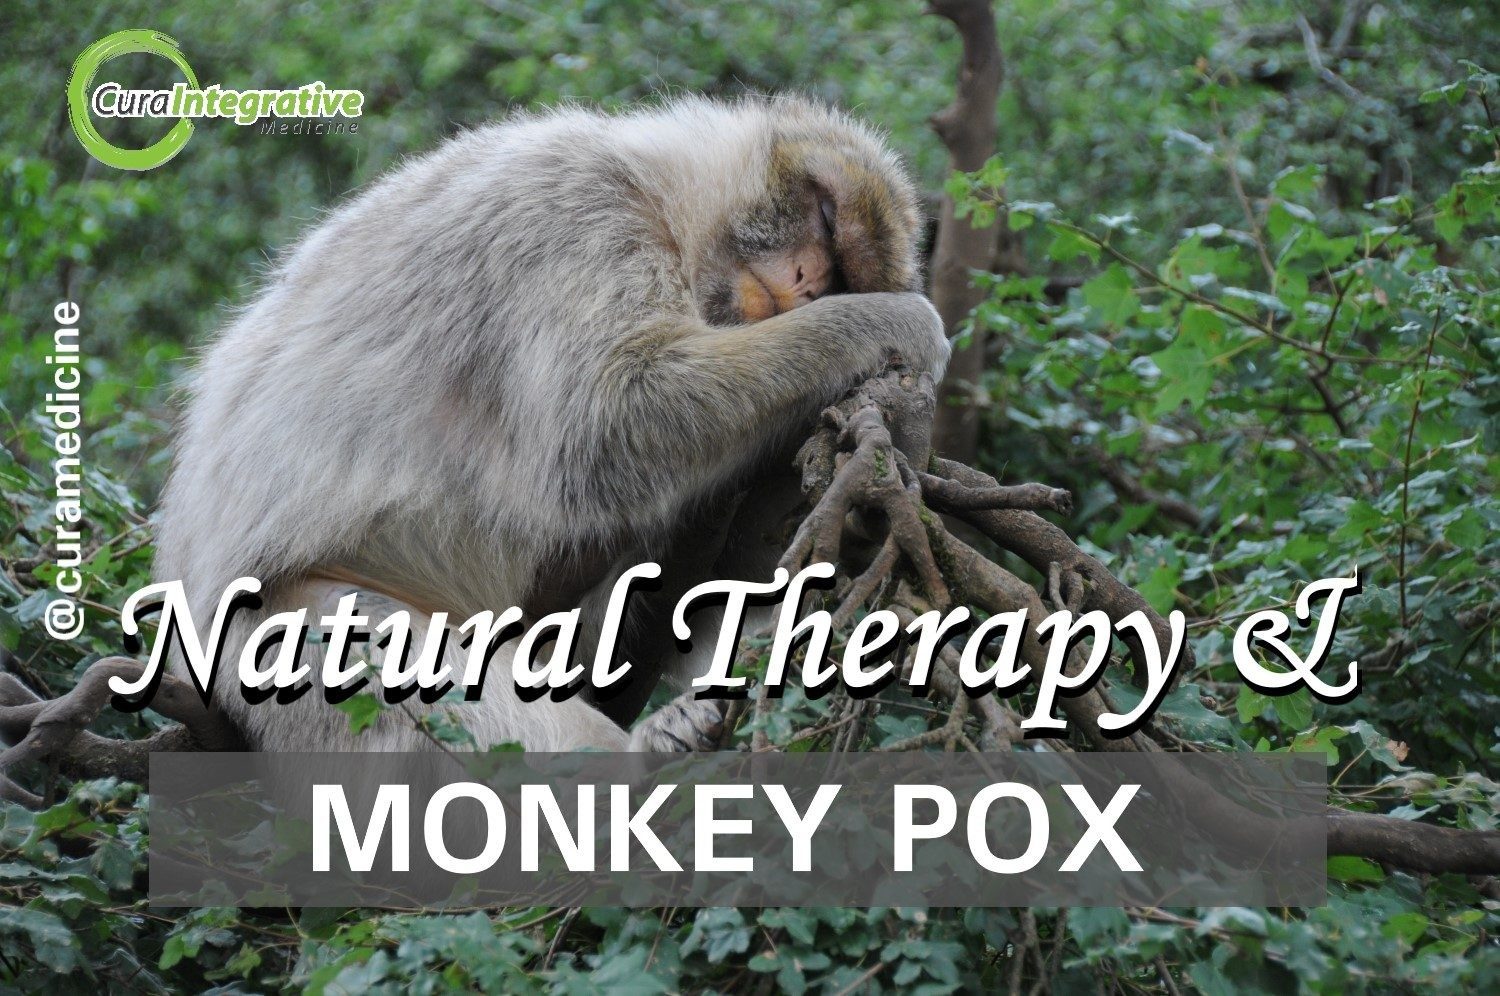 Natural Medicine For Monkey Pox